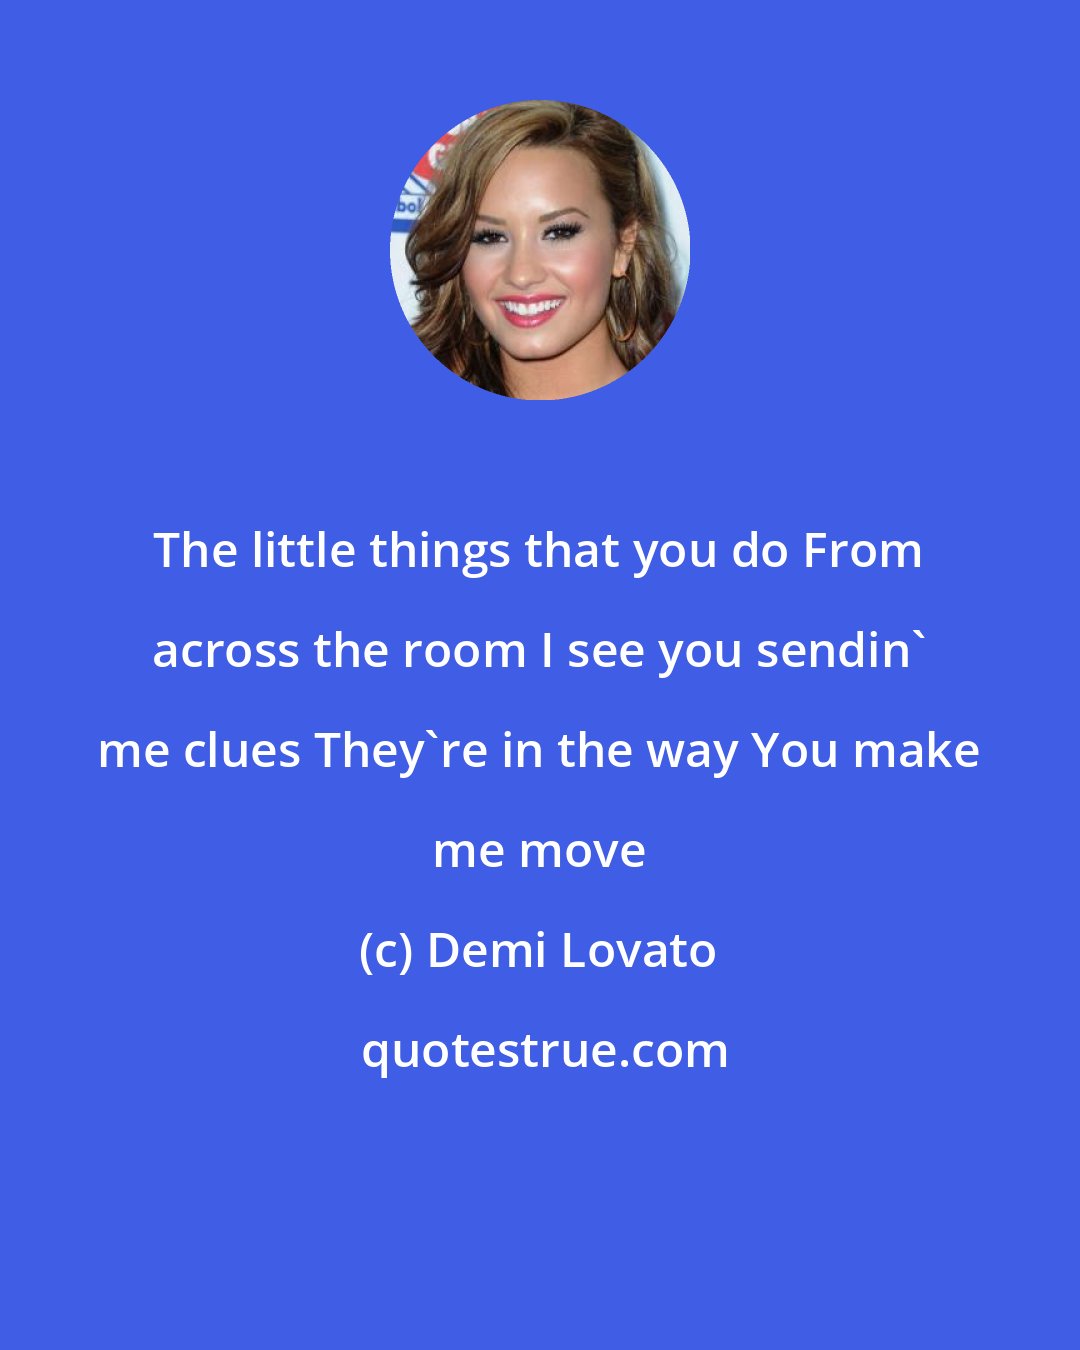 Demi Lovato: The little things that you do From across the room I see you sendin' me clues They're in the way You make me move